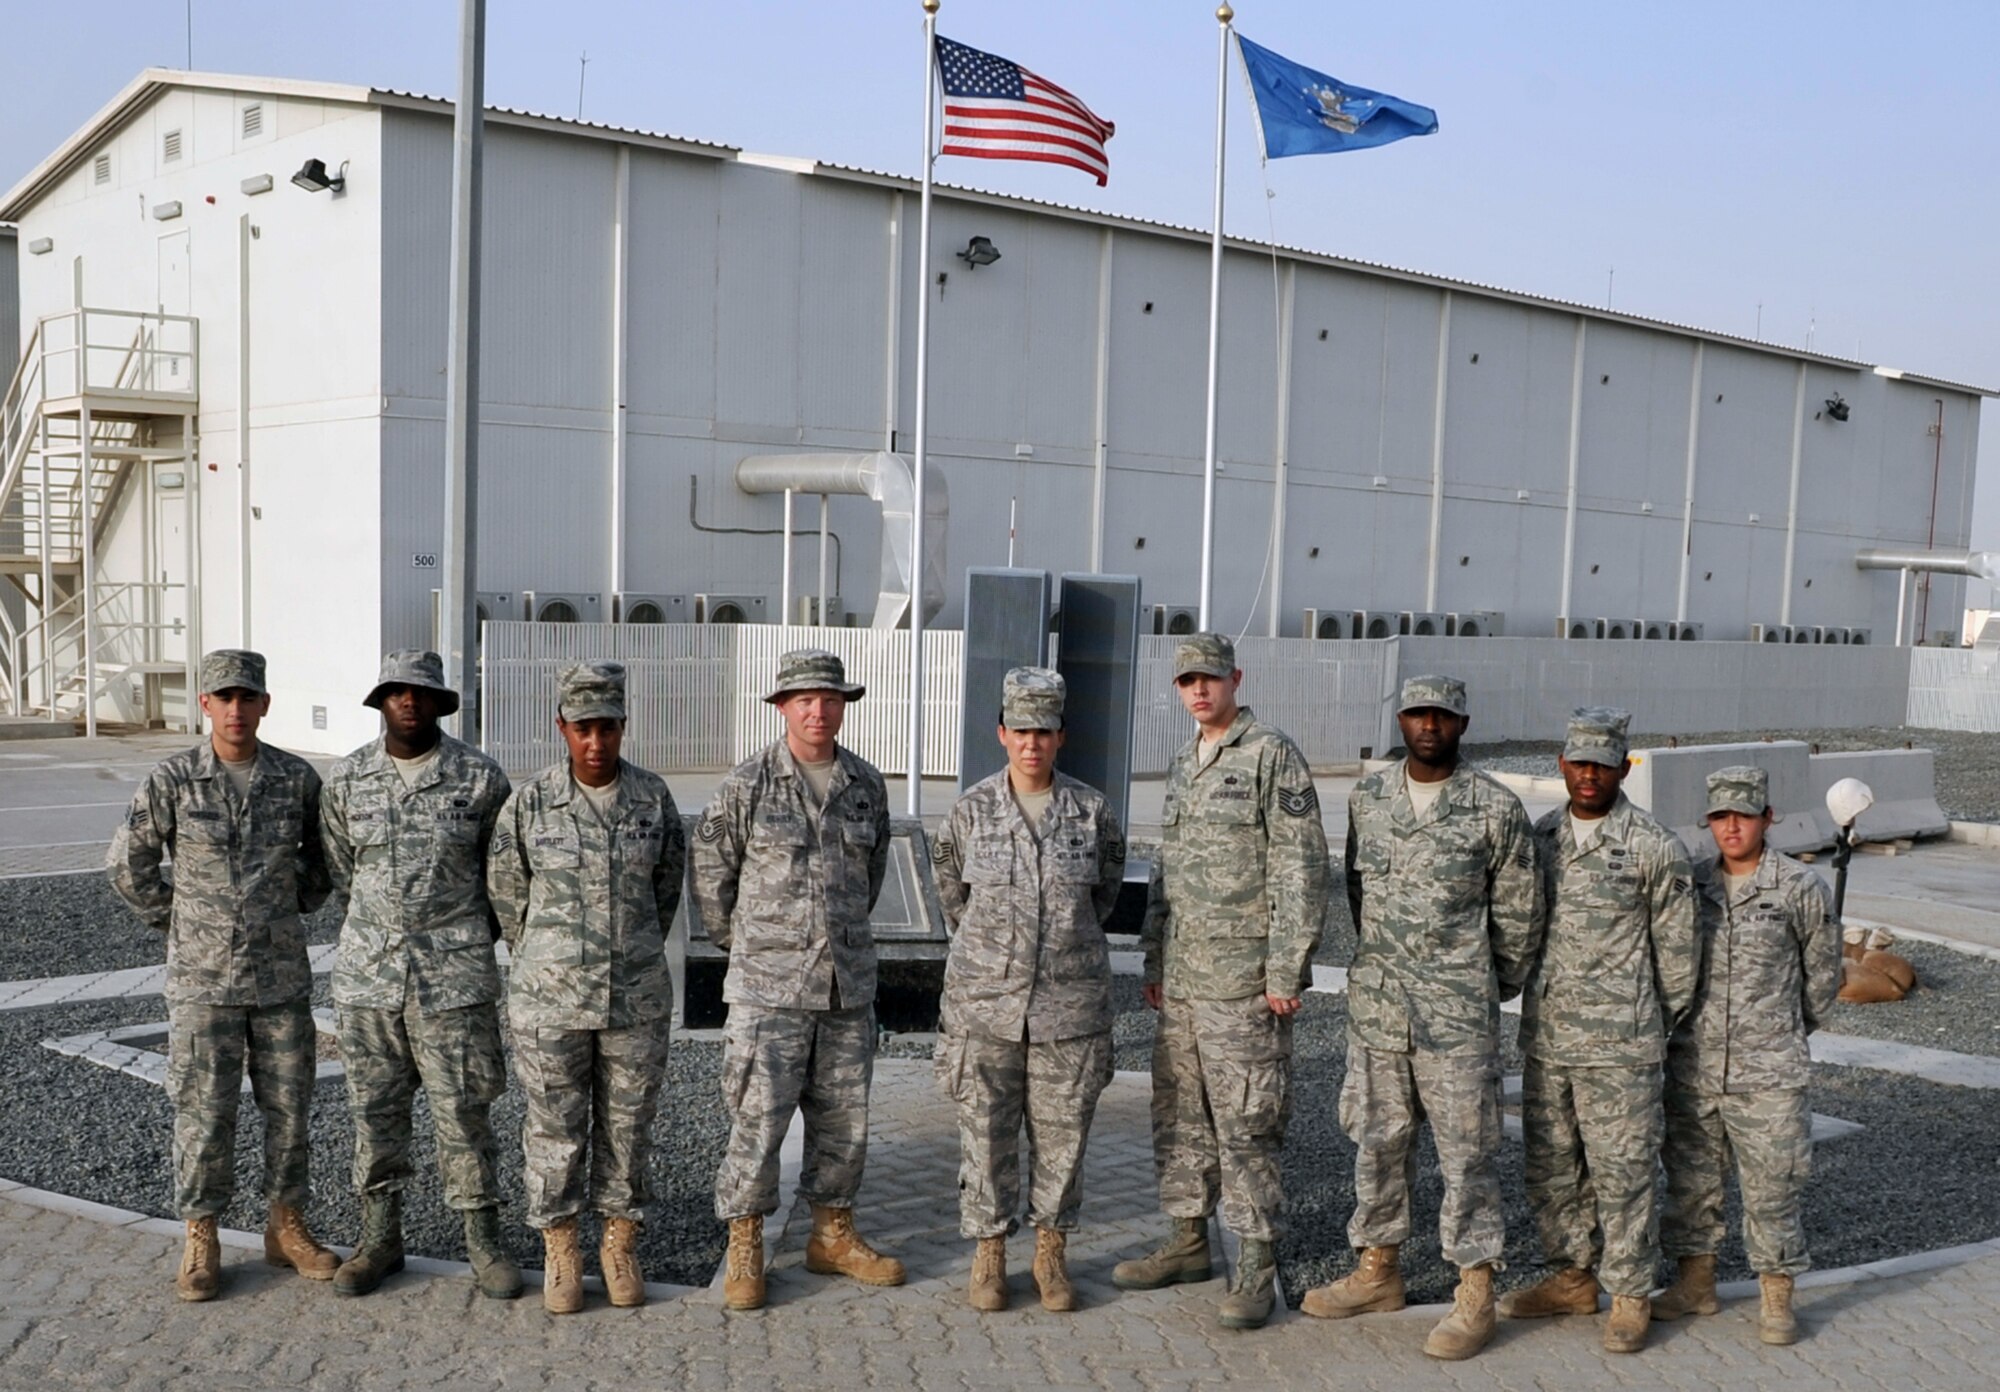 A nine-person team from the New Jersey Air National Guard's 108th Force Support Squadron, 108th Air Refueling Wing, at Joint Base McGuire-Dix-Lakehurst, N.J., are deployed supporting operations Iraqi Freedom, Enduring Freedom and the Combined Joint Task Force-Horn of Africa for the 380th Air Expeditionary Wing at a non-disclosed Base in Southwest Asia. Their deployed unit is the 380th Expeditionary Force Support Squadron and they are pictured here on June 1, 2010. The team includes, from left, Senior Airman Abdul Montaser, Airman 1st Class Andre Jackson, Staff Sgt. Heather Bartlett, Tech. Sgt. Jeremy Berry, Tech. Sgt. Lauren Holba, Tech. Sgt. Taylor Holba, Senior Airman Darnell Holmes, Senior Airman Levar Kinard, and Airman 1st Class Patricia Arias. (U.S. Air Force Photo/Master Sgt. Scott T. Sturkol/Released)